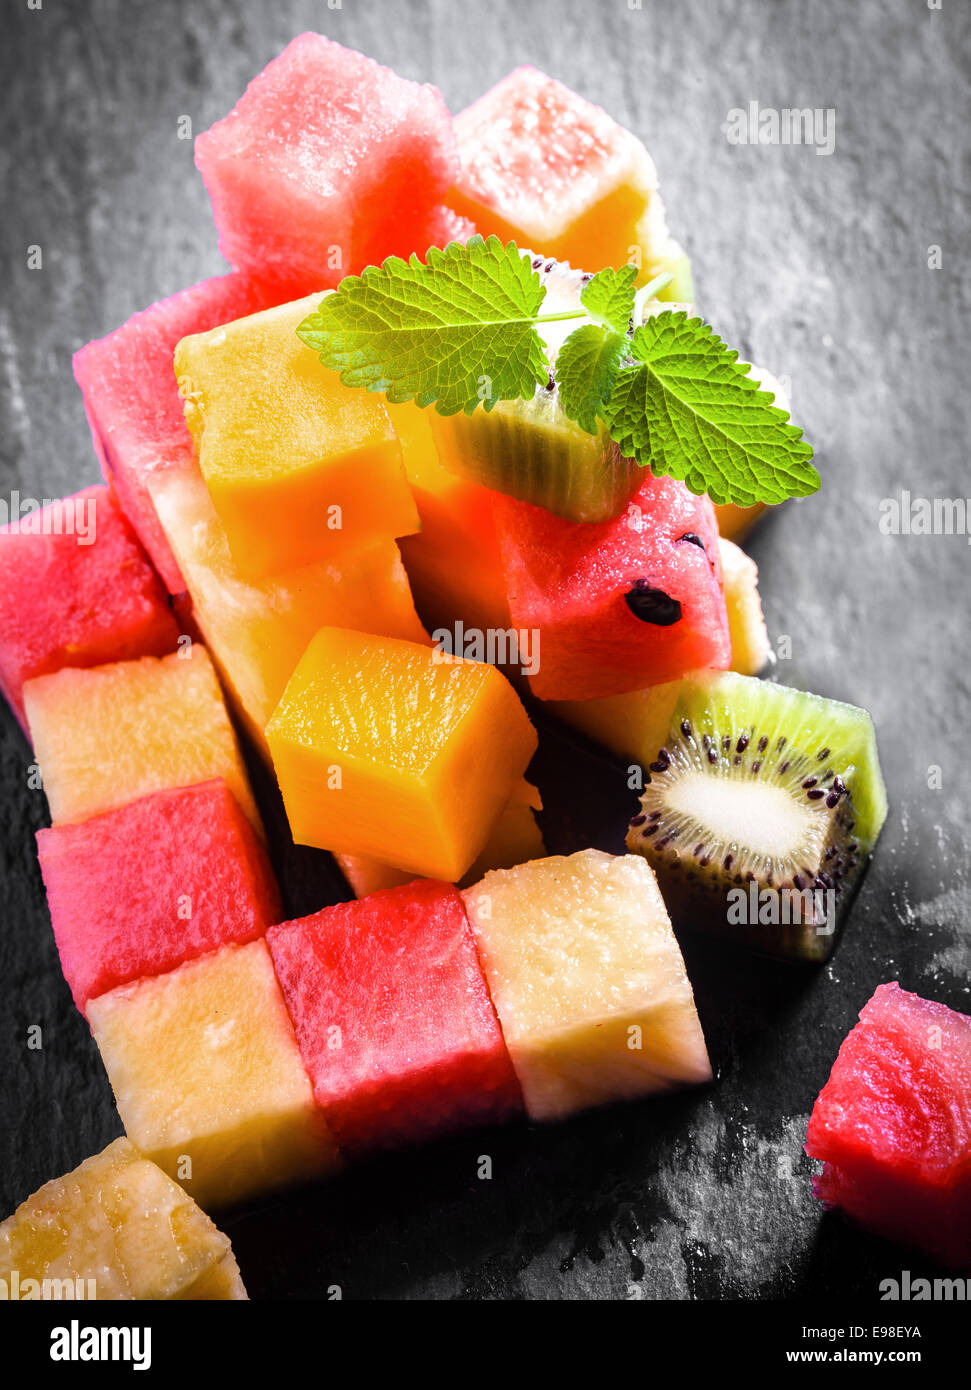 Pile of diced and cubed fresh summer fruit being prepared for a gourmet dessert with watermelon, pineapple, melon, orange, and kiwifruit on a slate kitchen counter Stock Photo